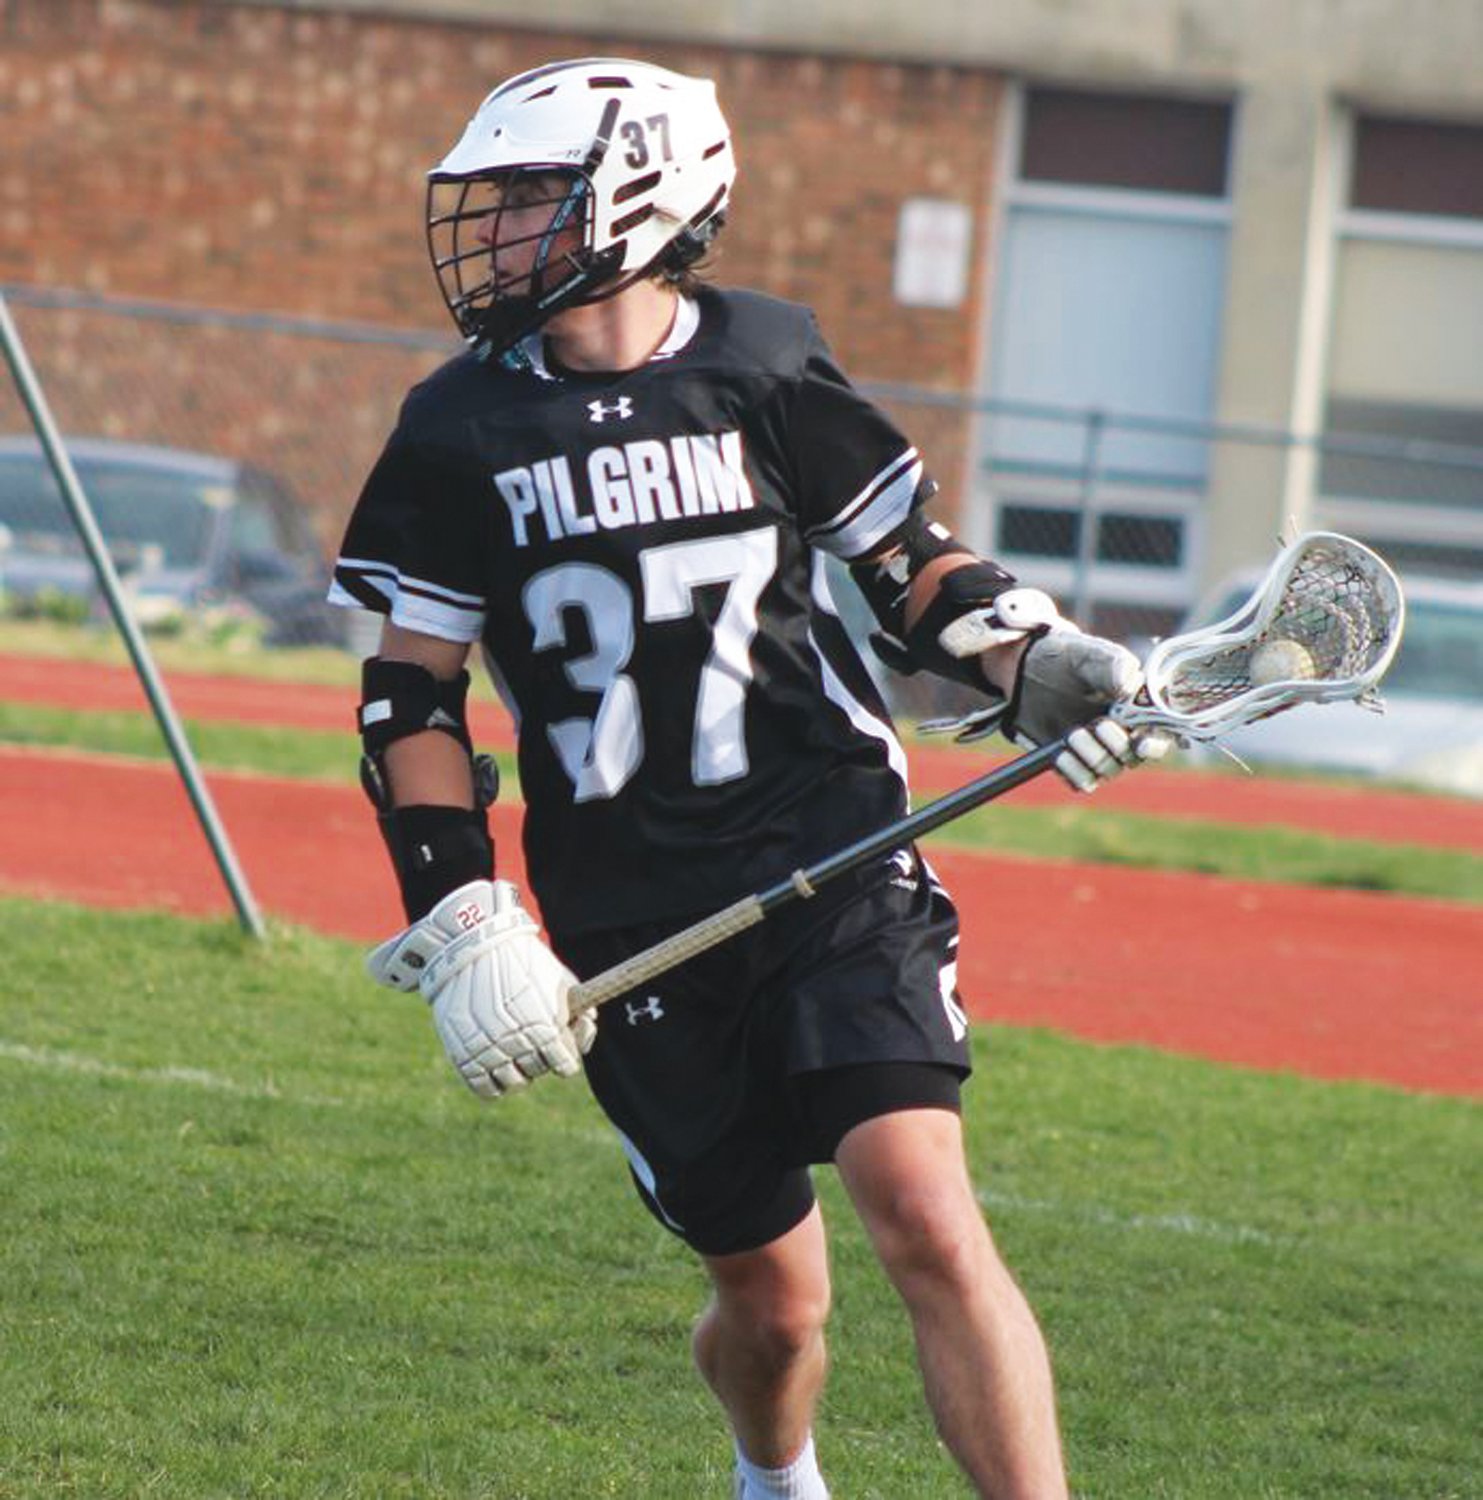 UP THE FIELD: Pilgrim’s Charlie Clements.